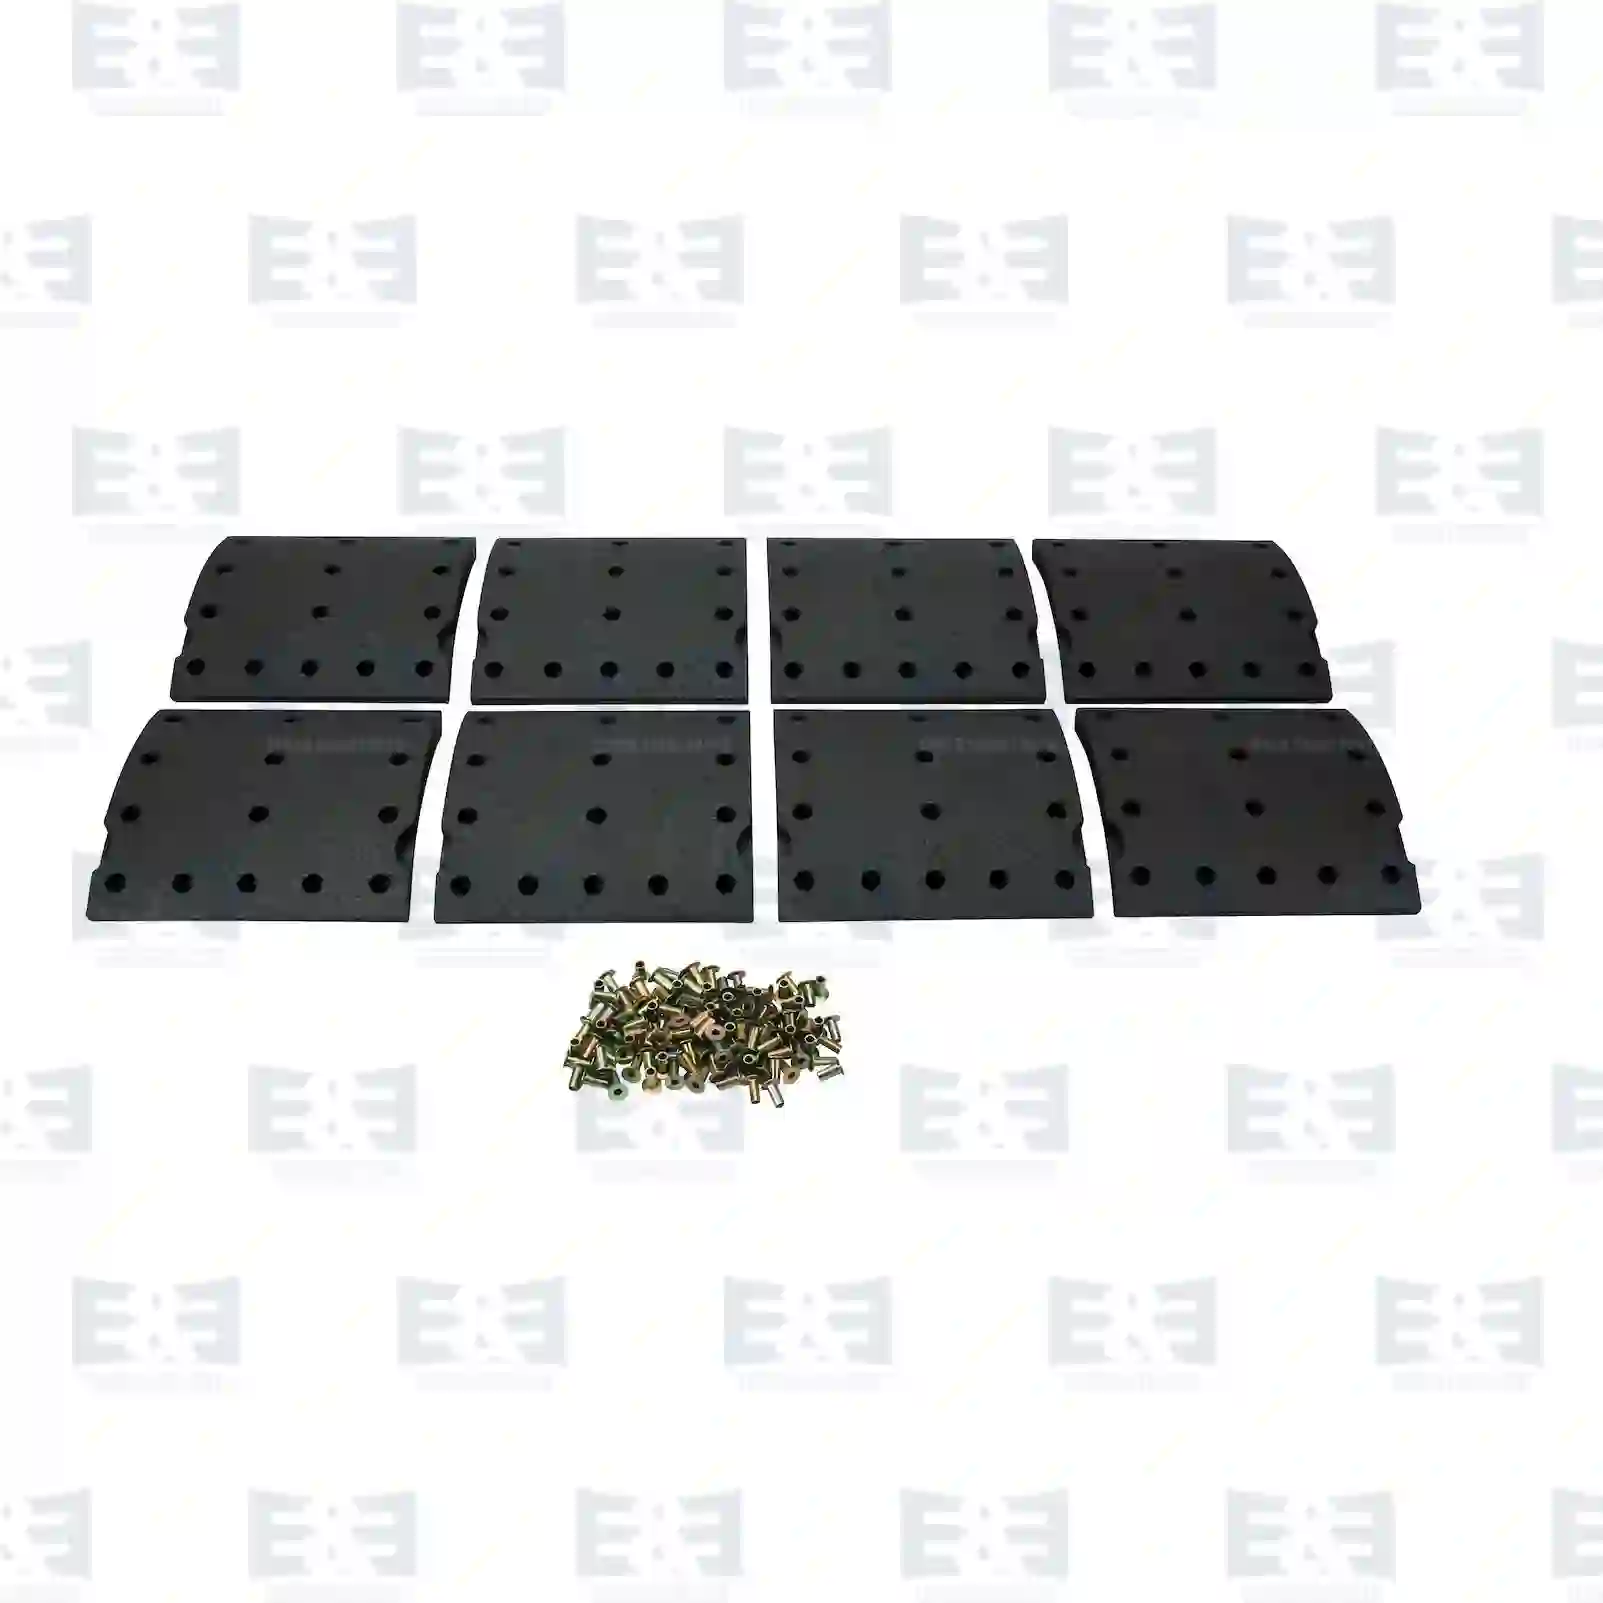 Brake Shoe Drum brake lining kit, axle kit, EE No 2E2297486 ,  oem no:1522138, 5001868089, 7421534386, MBLK1190, 89200340825, 21534385, 21534385S, 270520, 270520S, 270836, 270836S, 2708361, 270942, 270942S, 2709426, 270976, 270976S, 2709765, 275996, 275996S, 3090349, 3090349S, 3091458, 3091458S, 3093263, 3095169, 3095169S, 3095179, 3095179S, 3095189, 3095189S, ZG50449-0008 E&E Truck Spare Parts | Truck Spare Parts, Auotomotive Spare Parts